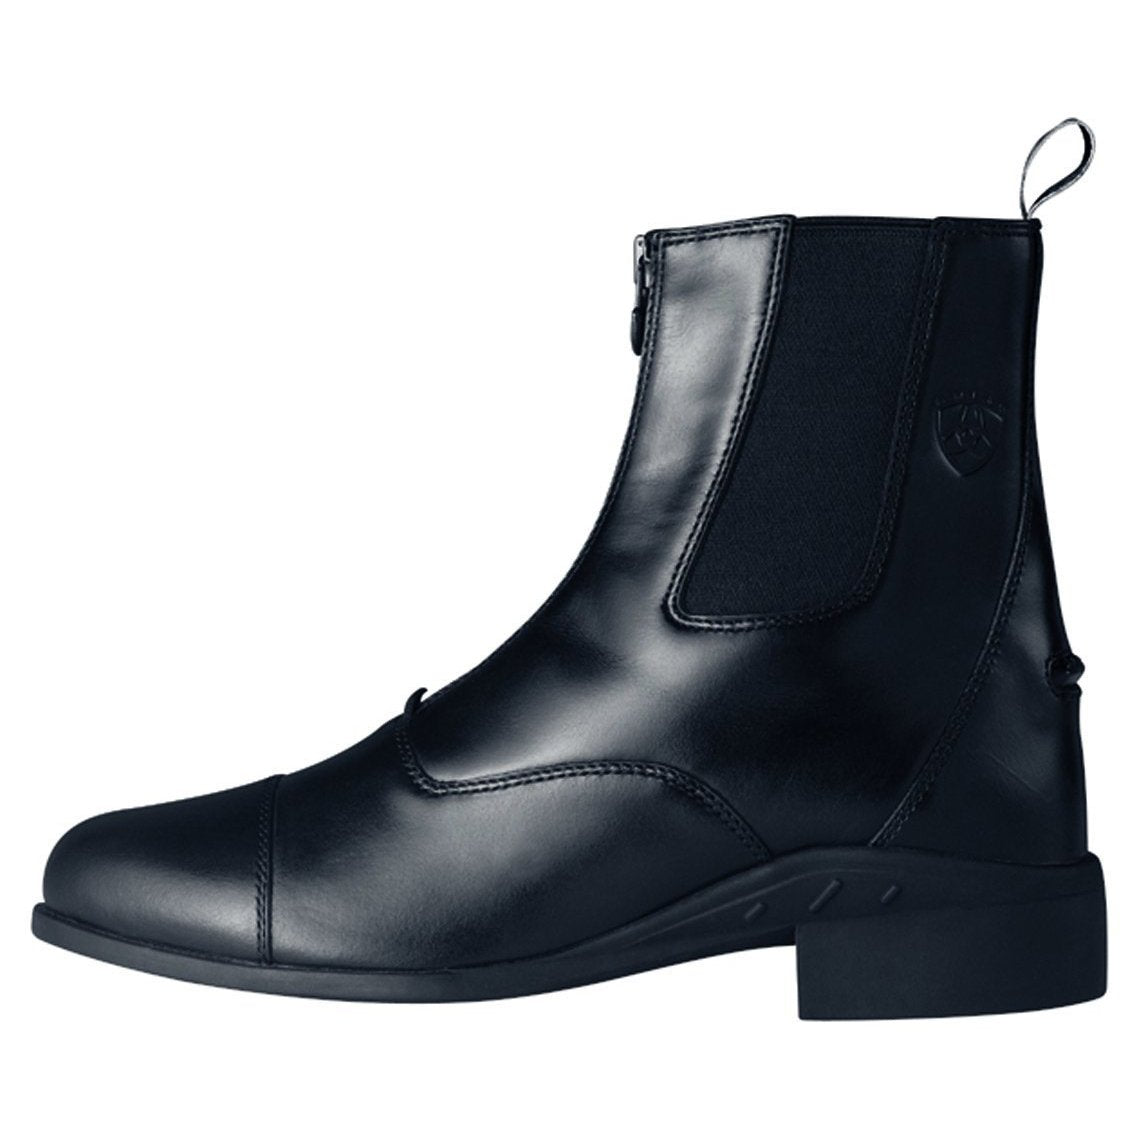 Black equestrian jodhpur boots with elastic sides and stirrup leathers.